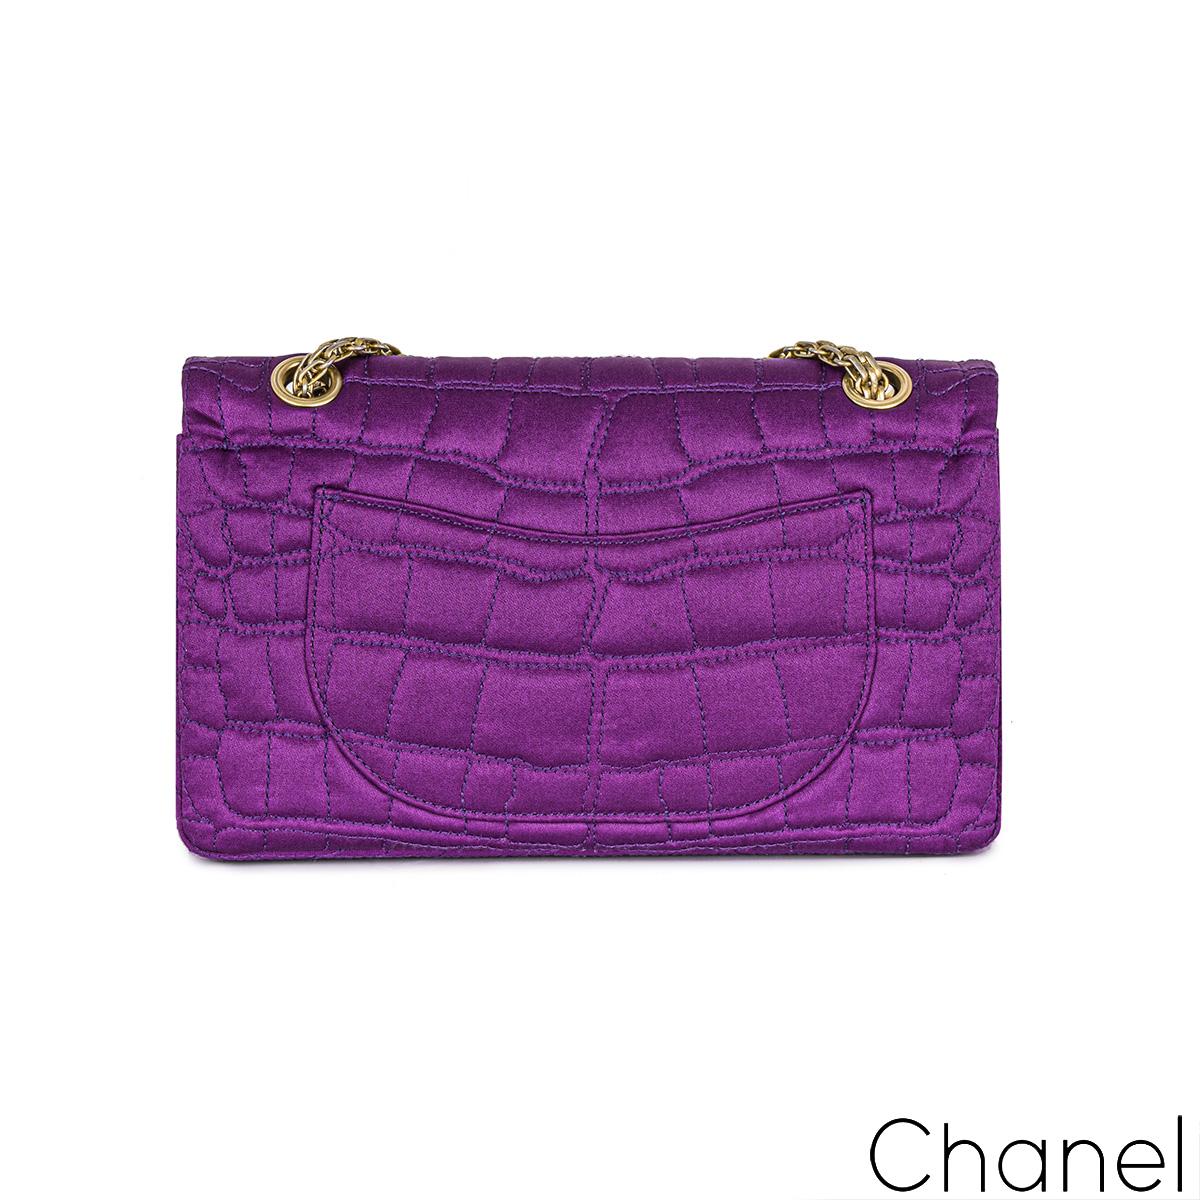 A lovely Chanel 2.55 Reissue small 255 double flap handbag. The exterior of this reissue 2.55 is crafted with purple satin crocodile embroidered stitching and aged gold-tone hardware. The exterior features a front flap, signature mademoiselle turn